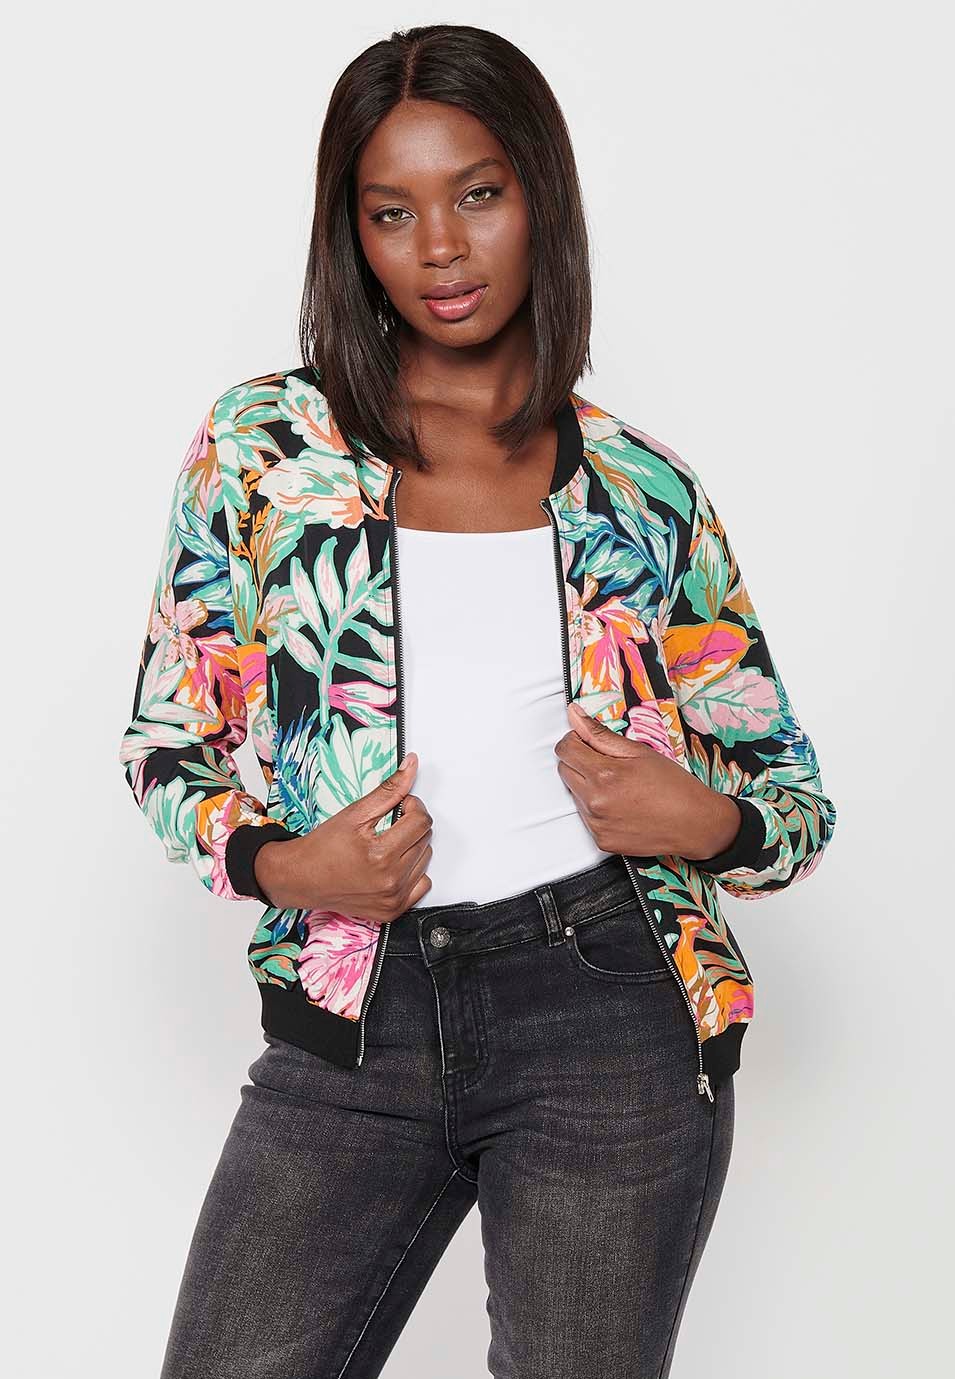 Long-sleeved sweatshirt jacket with ribbed finishes and floral print with front zipper closure. Composition 100% Polyester. Multicolor Color for Women from the Koröshi brand